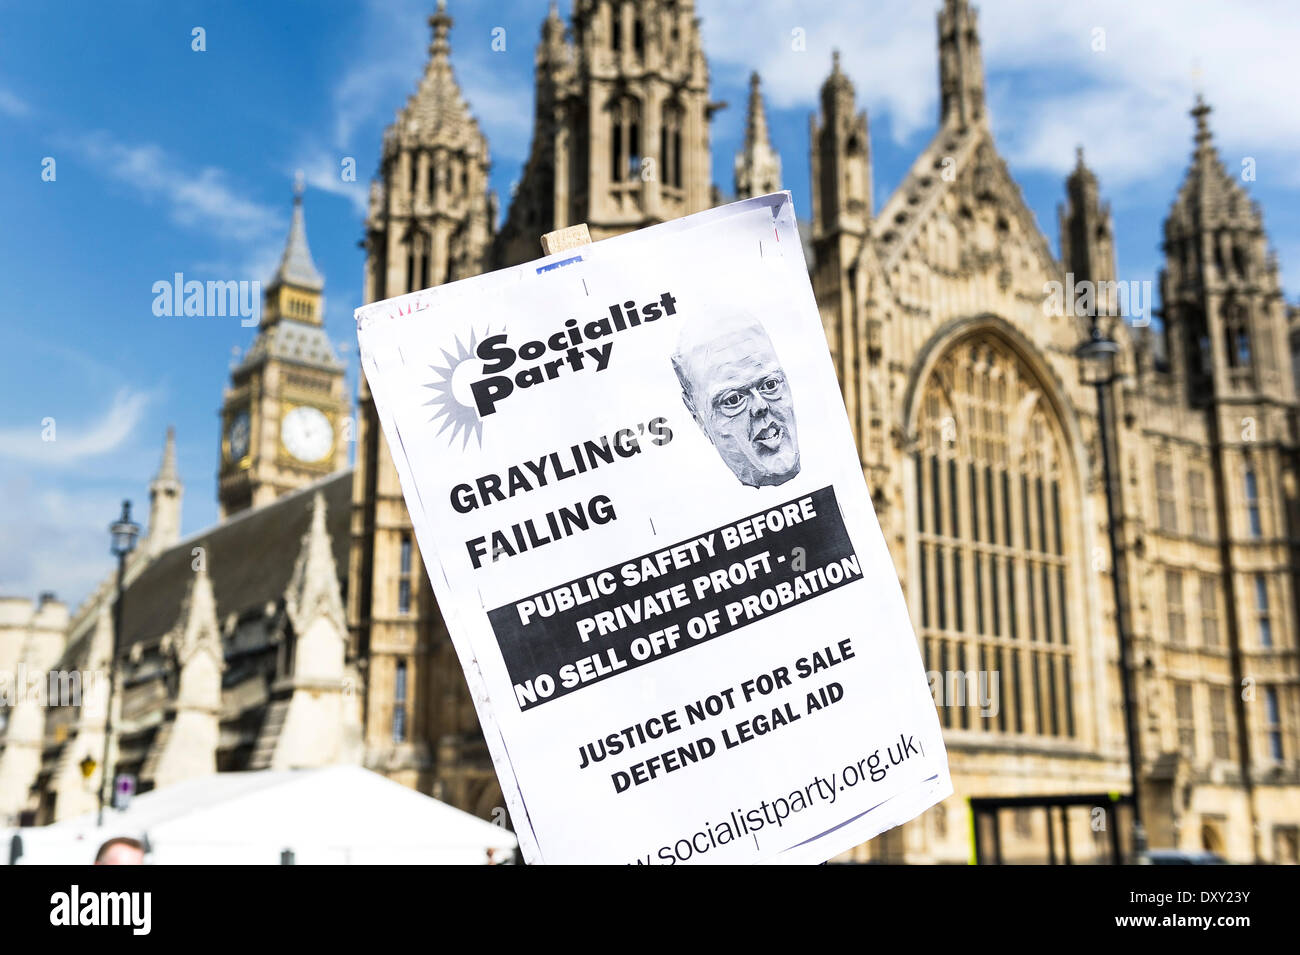 London, UK. 1st April 2014.  A placard is held aloft outside the Houses of Parliament as part of the joint demonstration by probation officers and legal aid solicitors. Photographer: Gordon Scammell/Alamy Live News Stock Photo